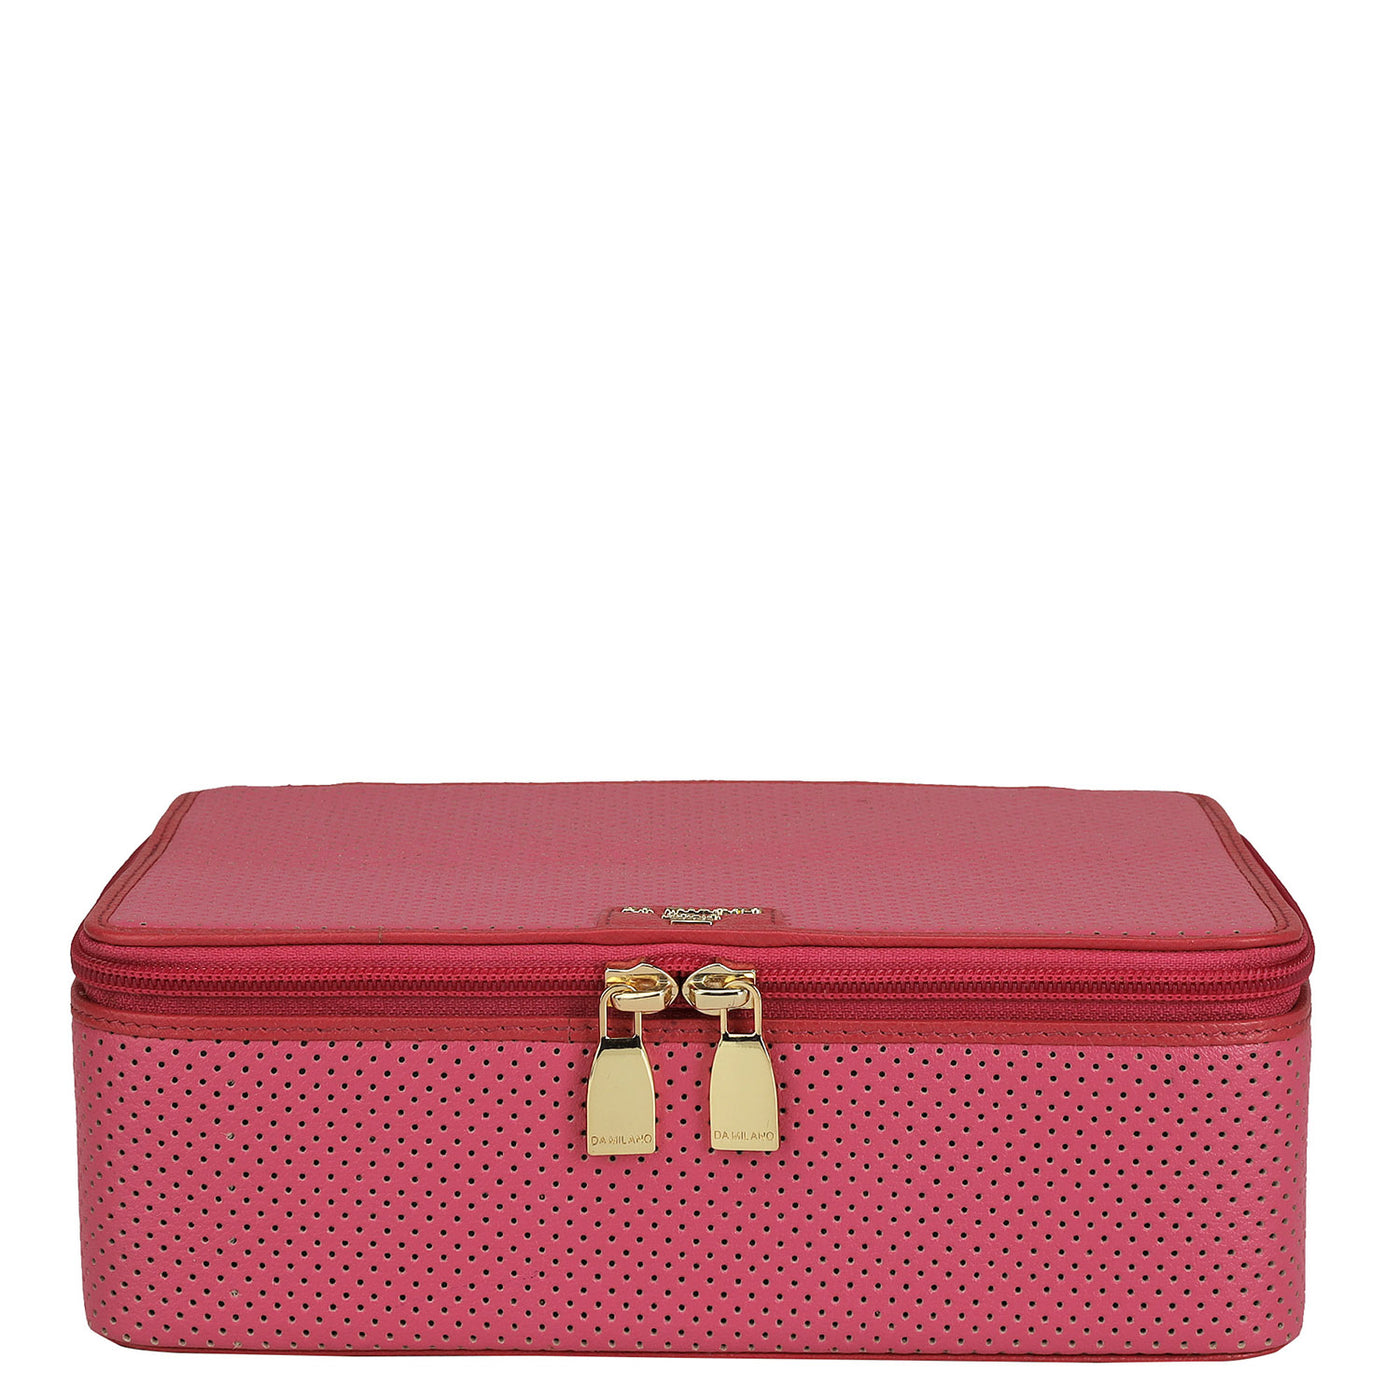 Pun Leather Spectacle Case - Hot Pink